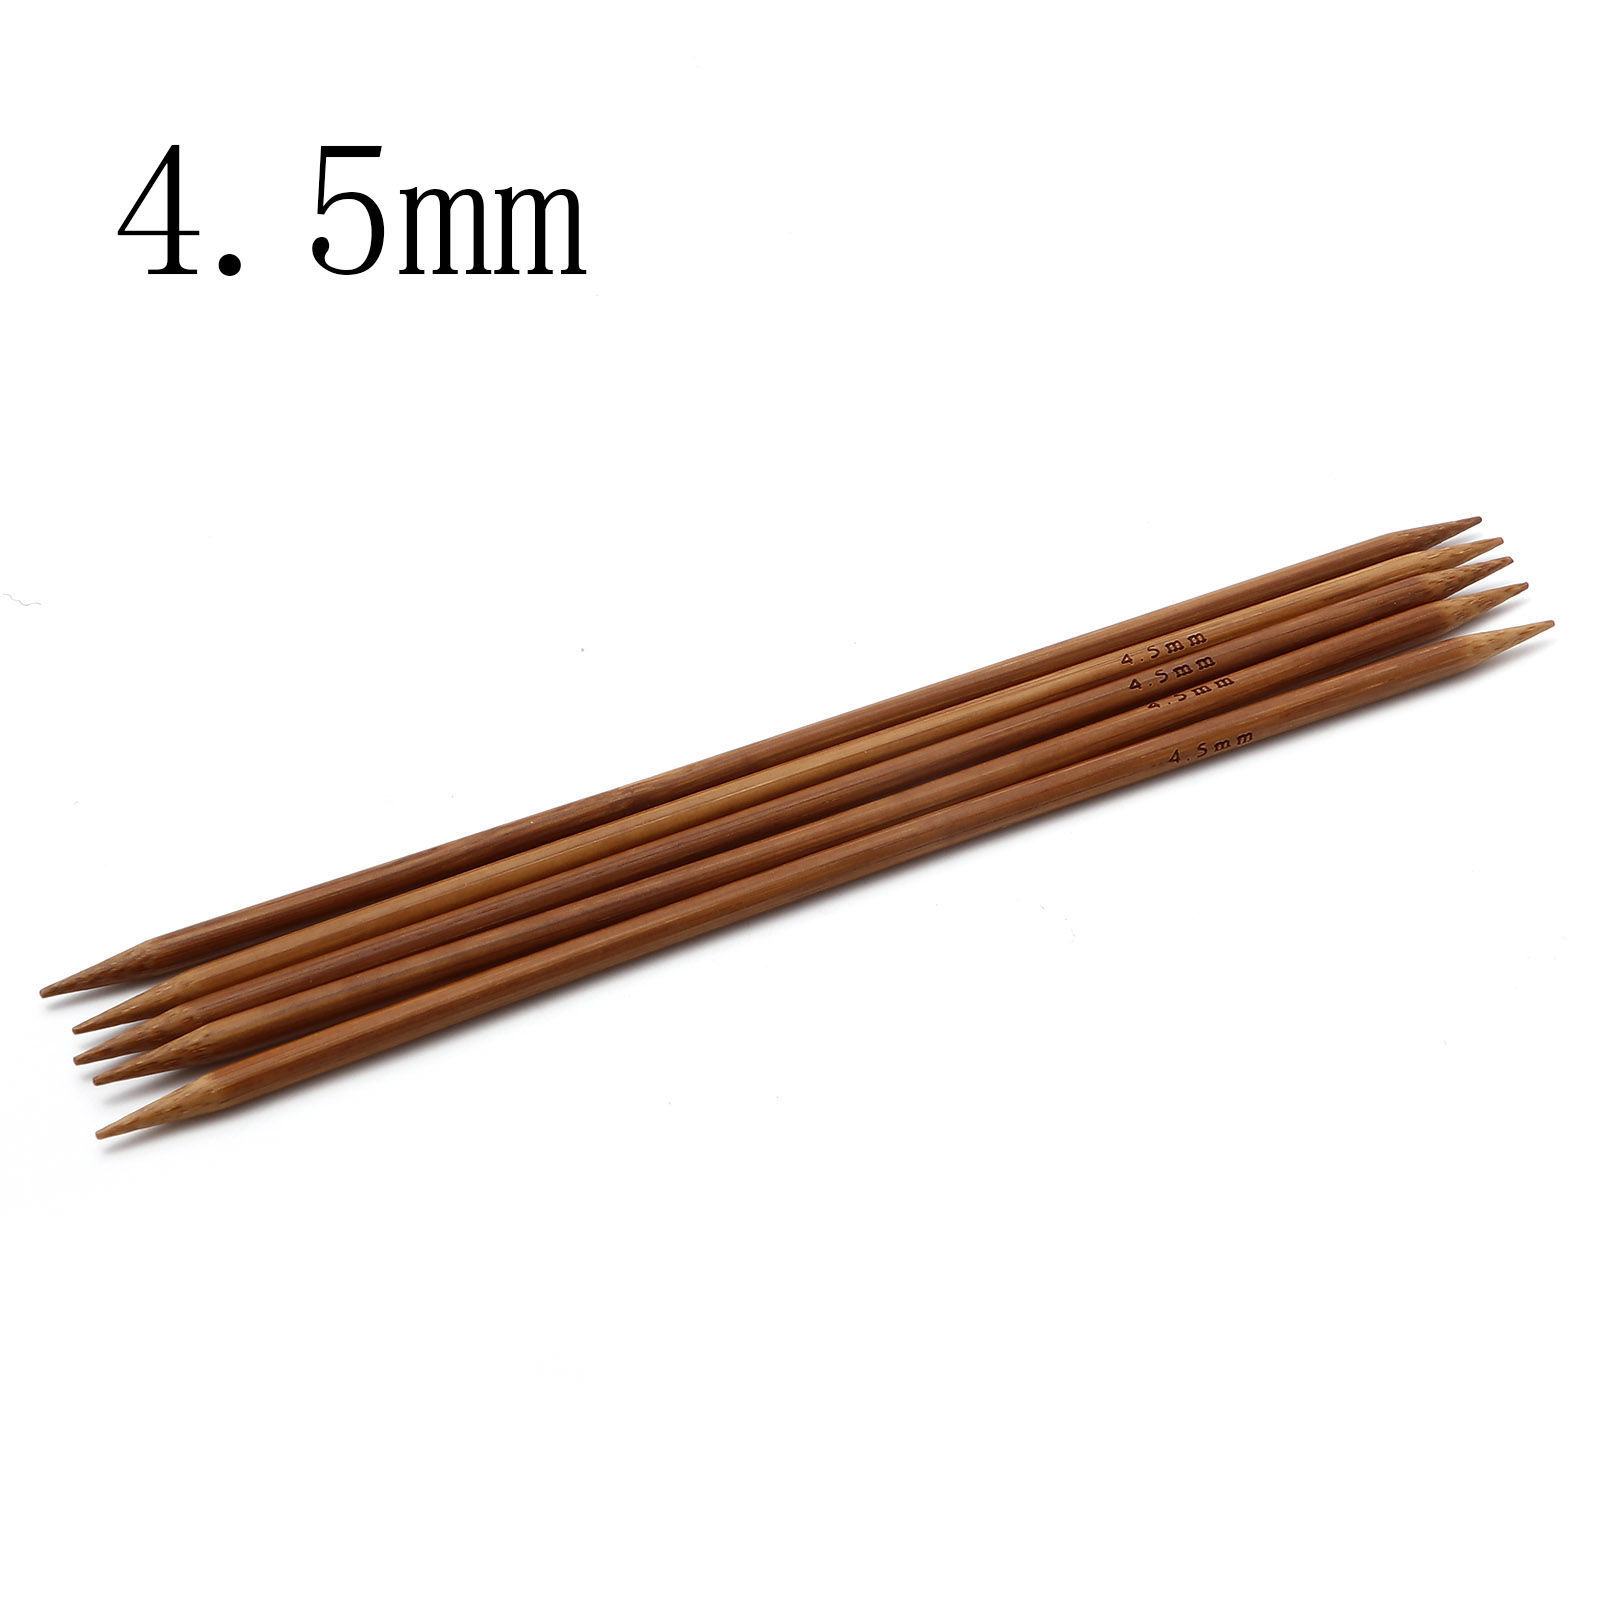 Picture of (US7 4.5mm) Bamboo Double Pointed Knitting Needles Brown 20cm(7 7/8") long, 5 PCs